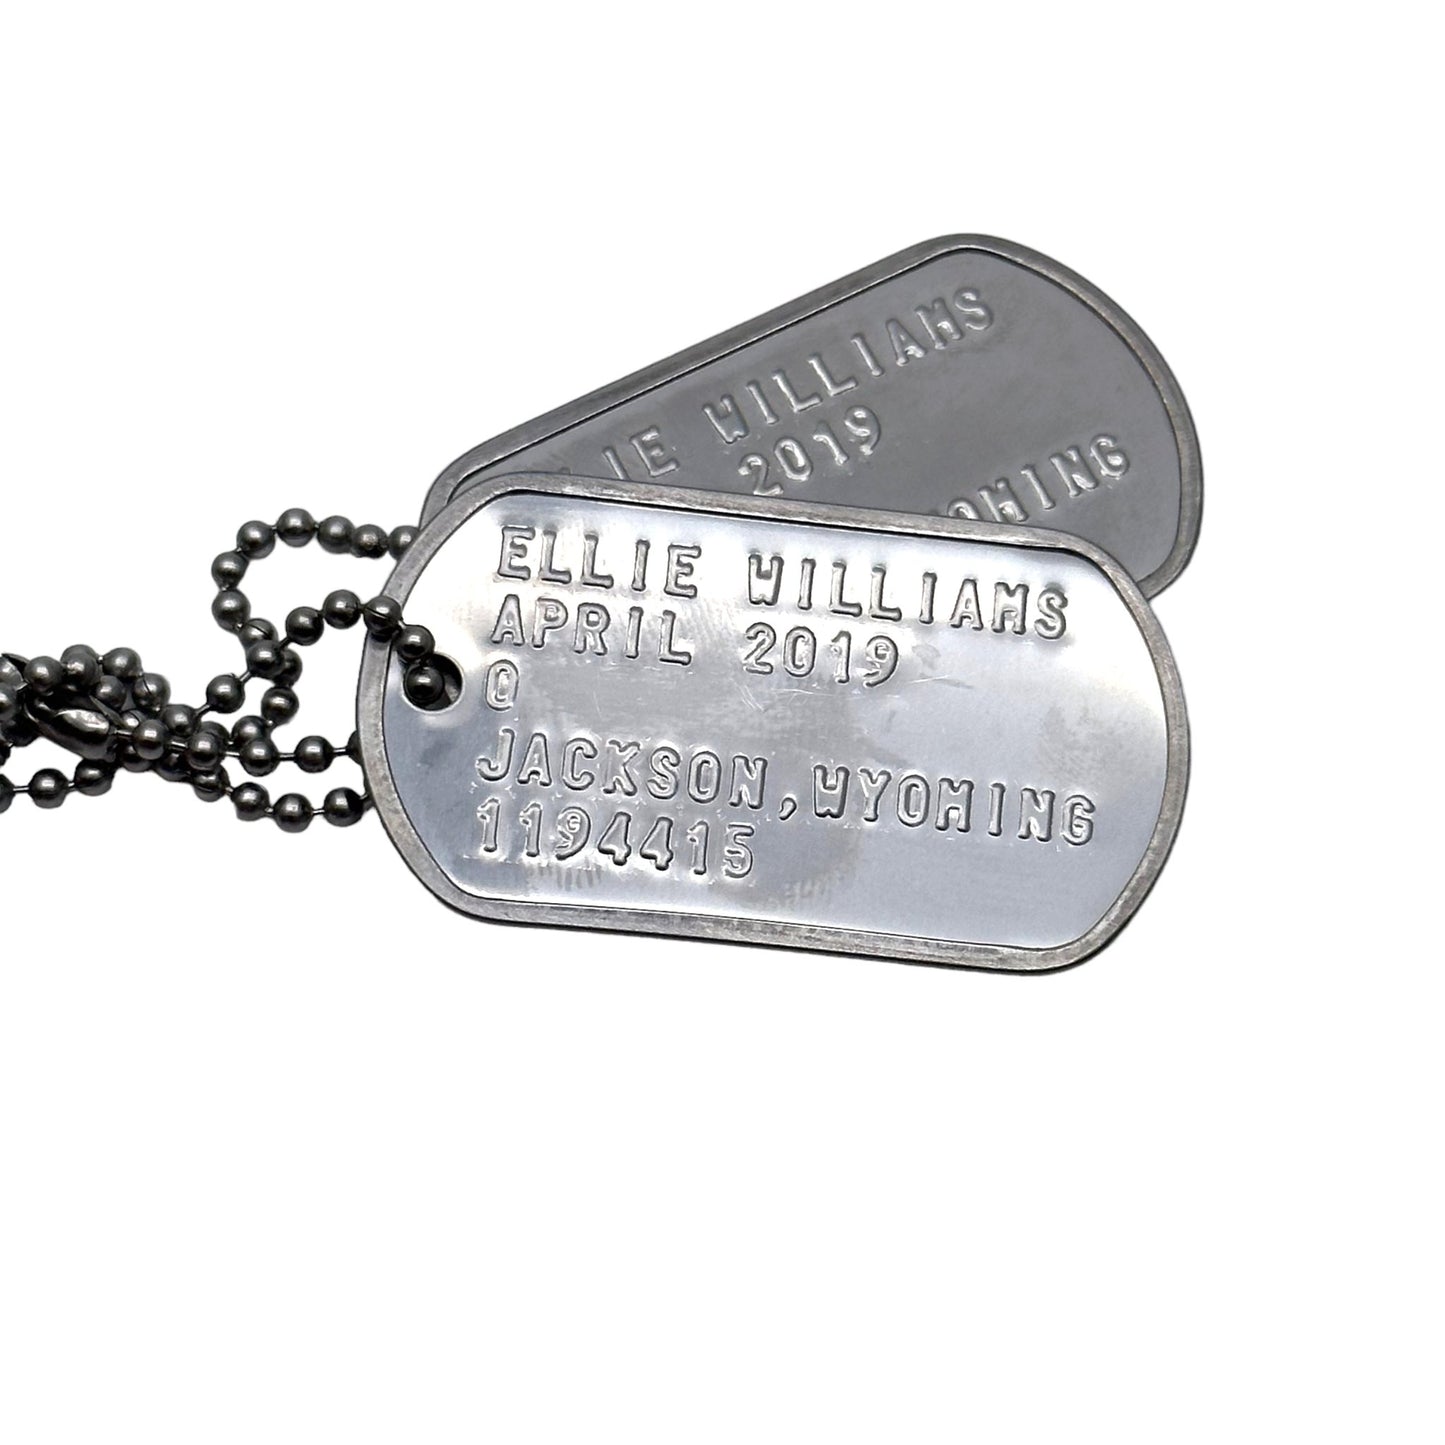 'NEW KID' Military Dog Tags - Cosplay Costume Prop Replica - Stainless Steel Chains Included - TheDogTagCo